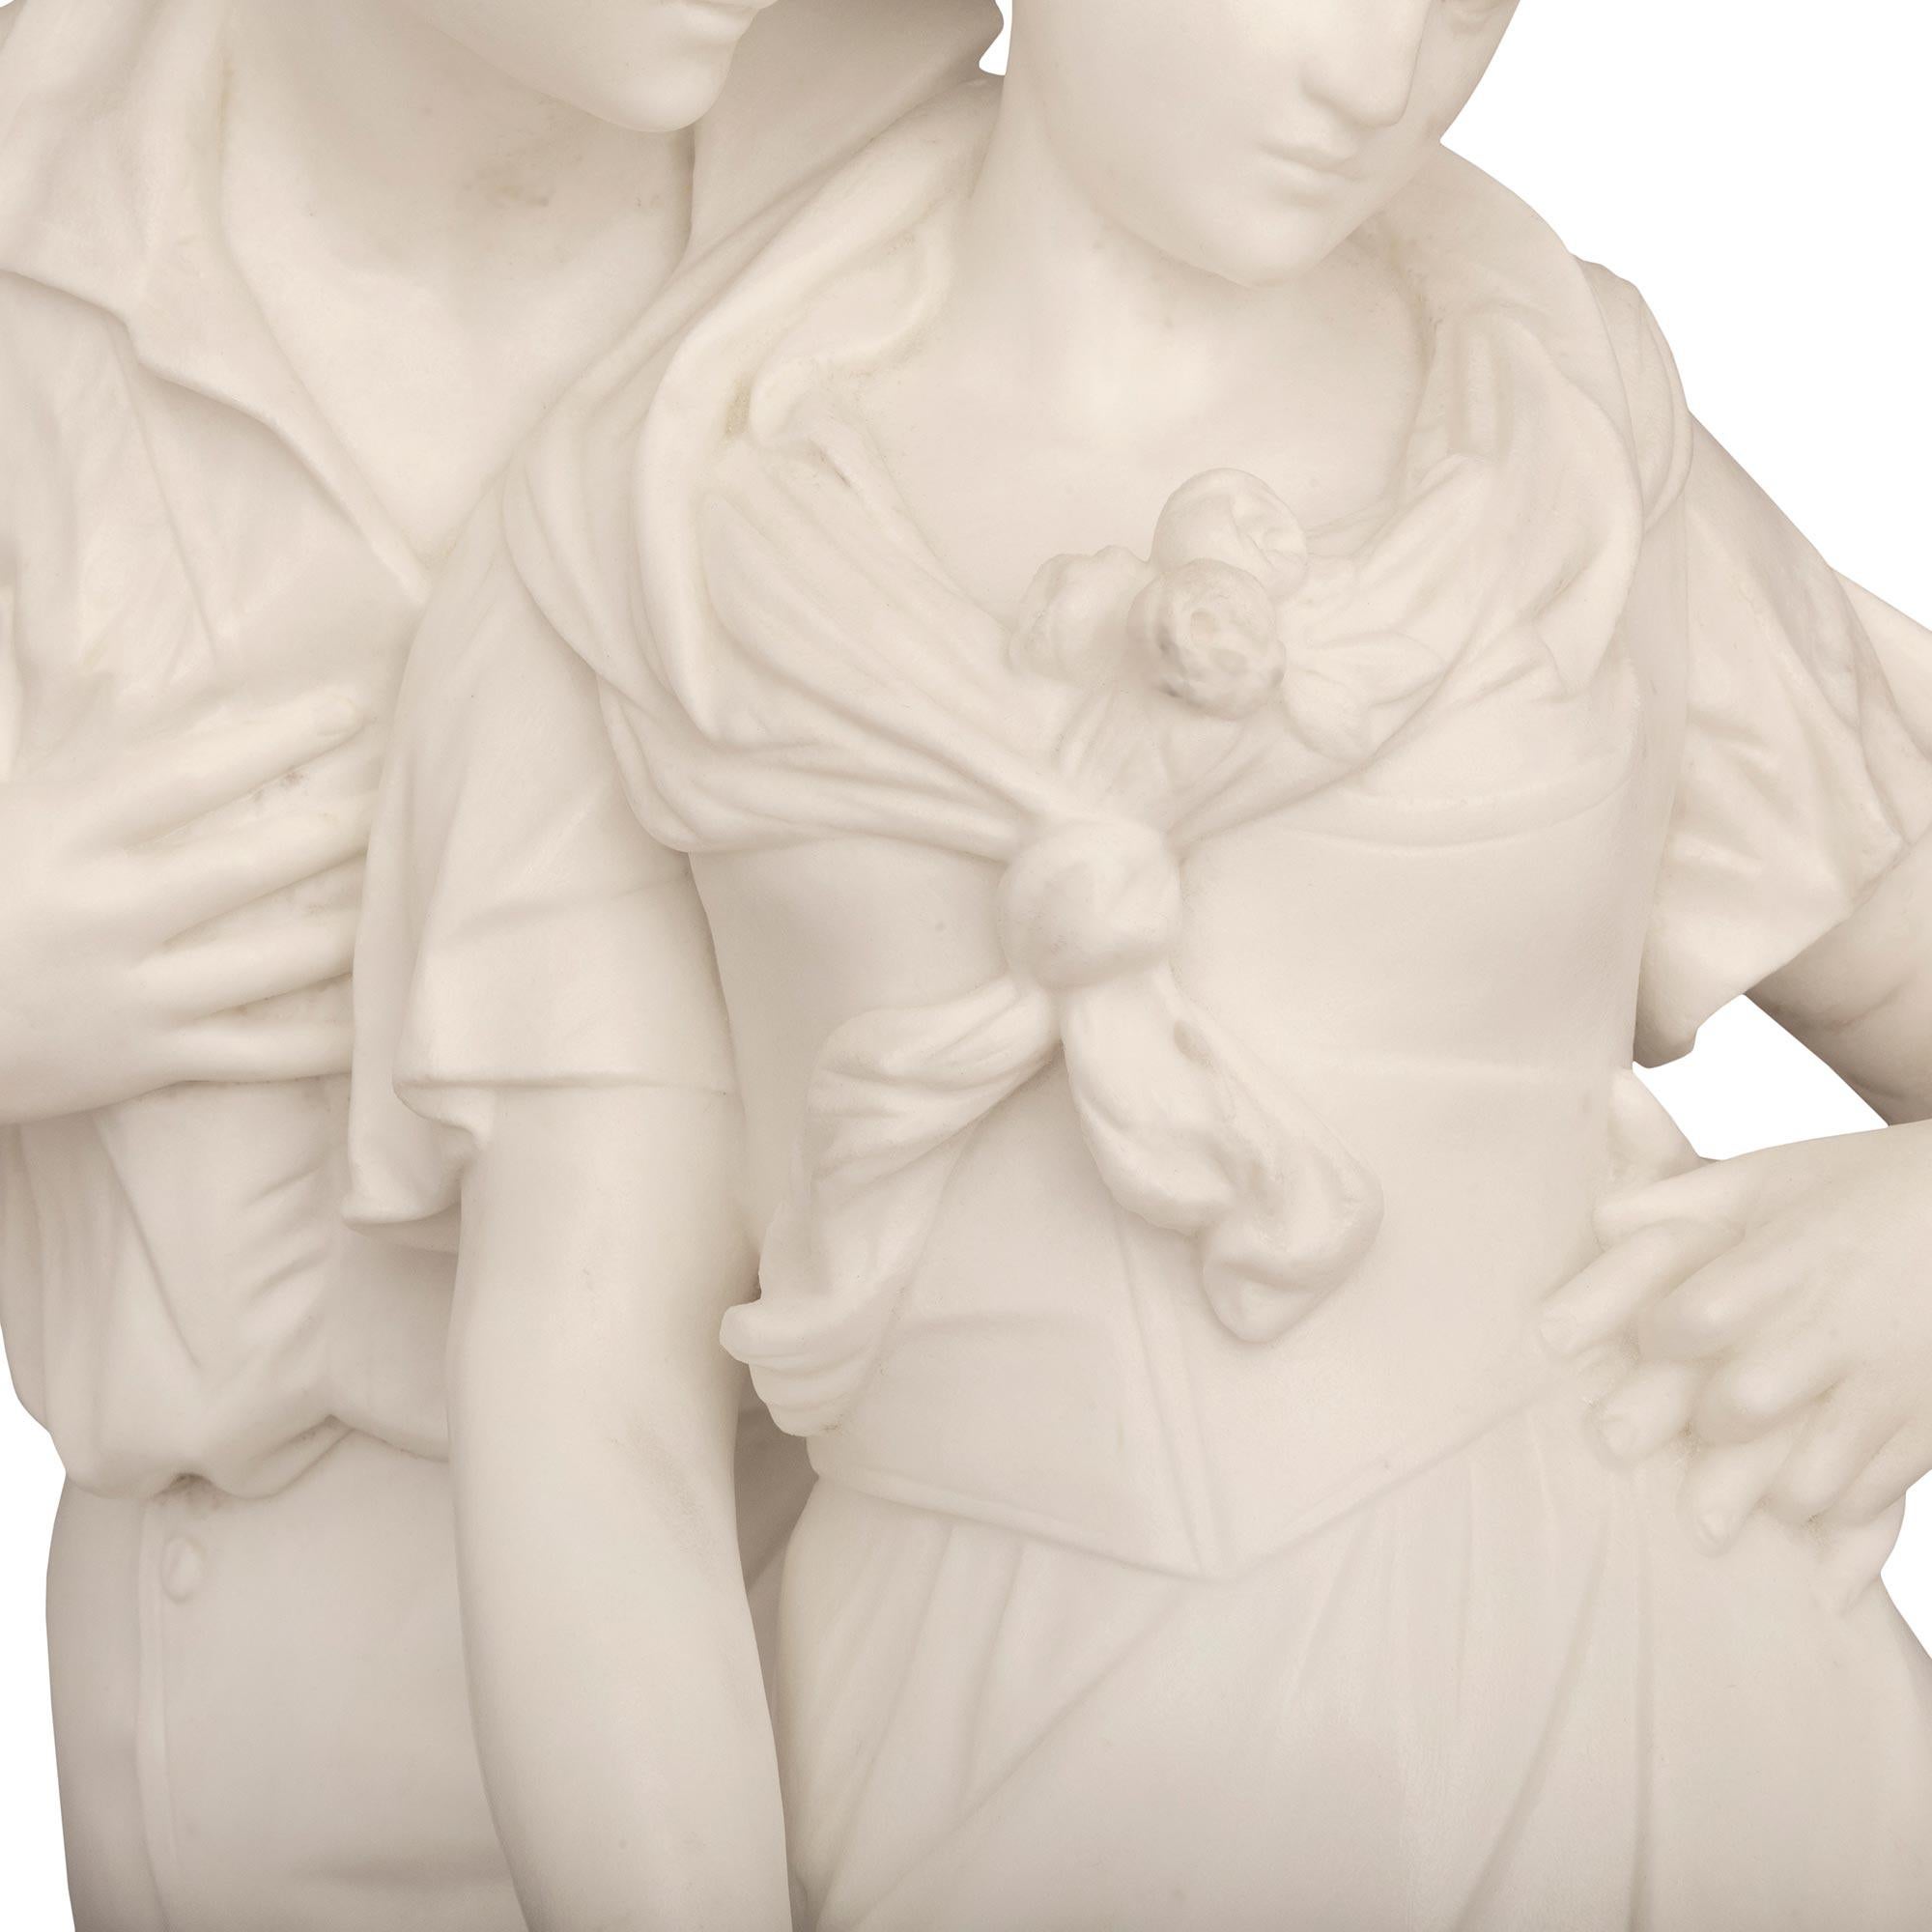 Italian 19th Century Marble Statue of Young Courtship For Sale 3